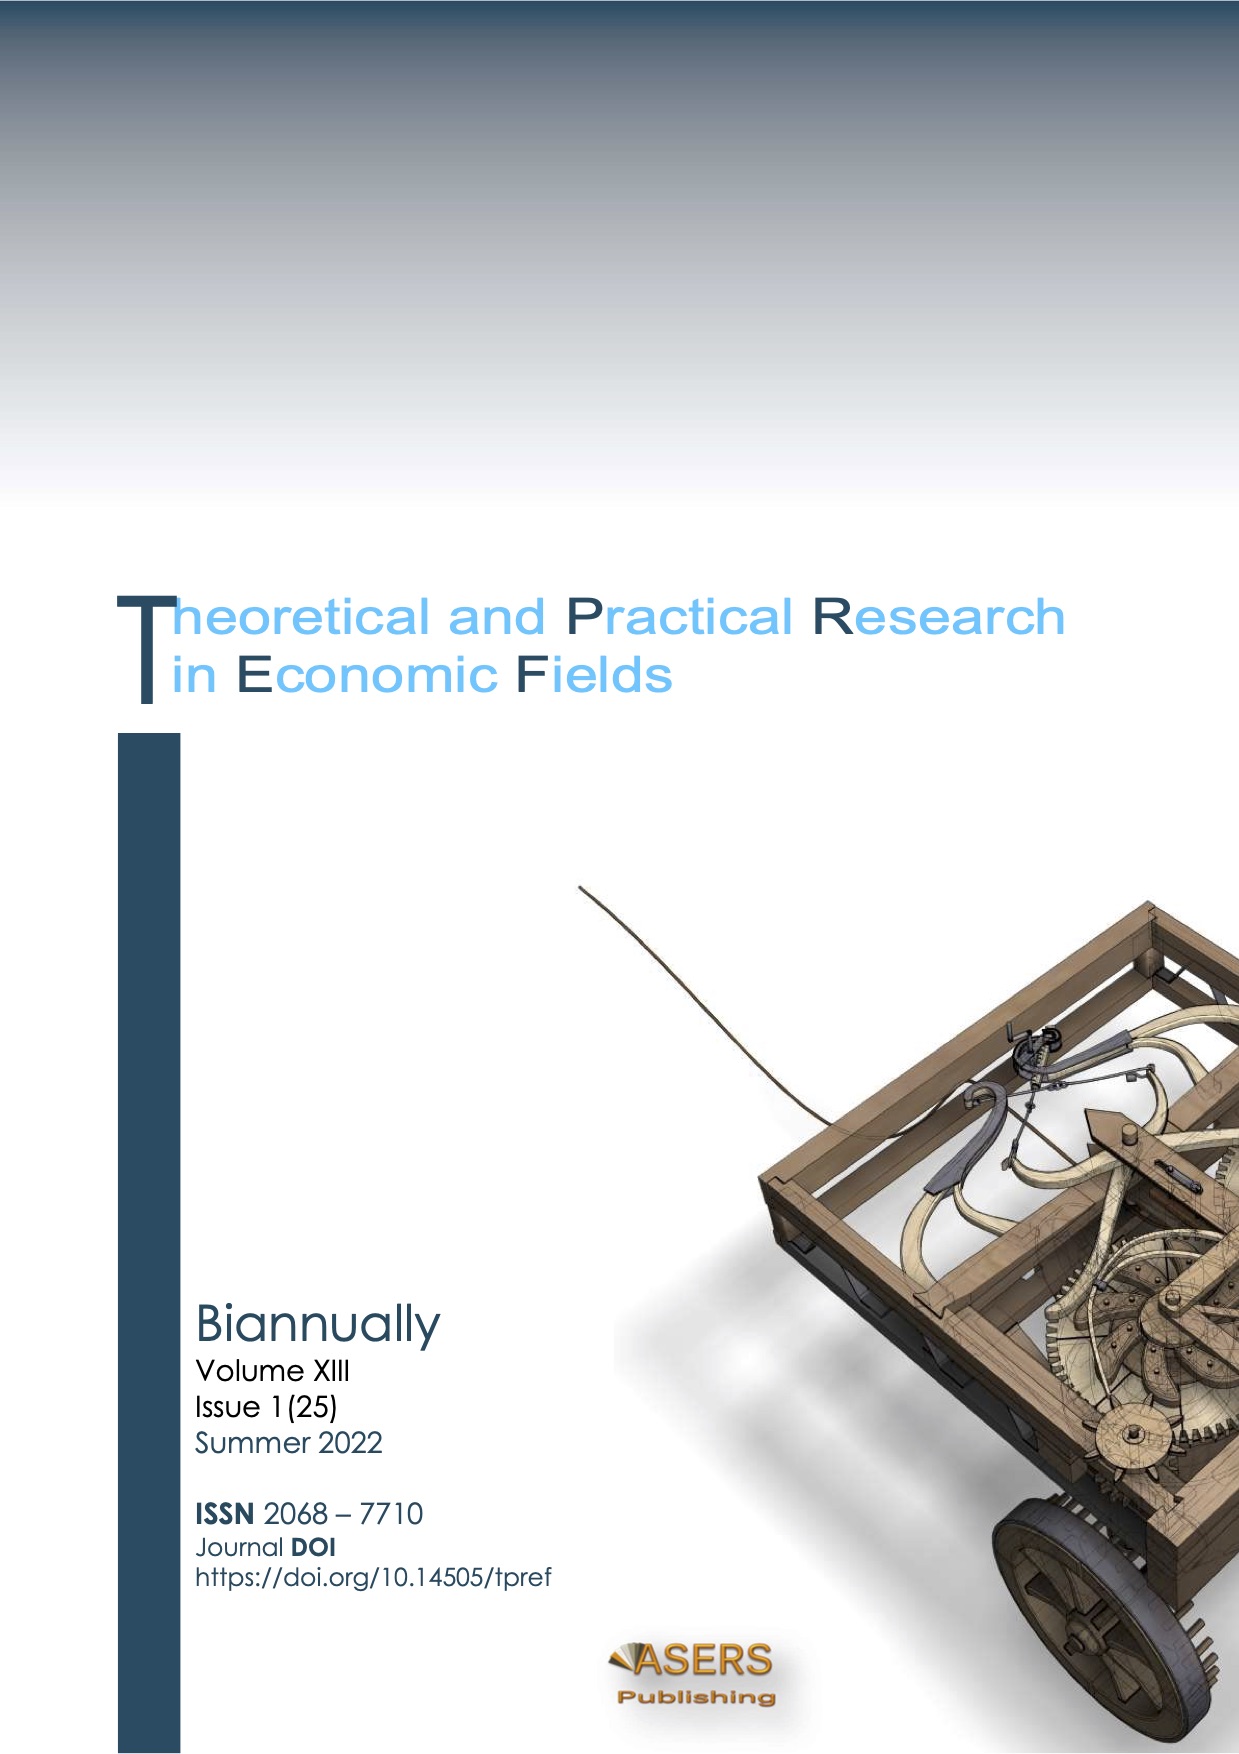 Theoretical and Practical Research in Economic Fields (TPREF)